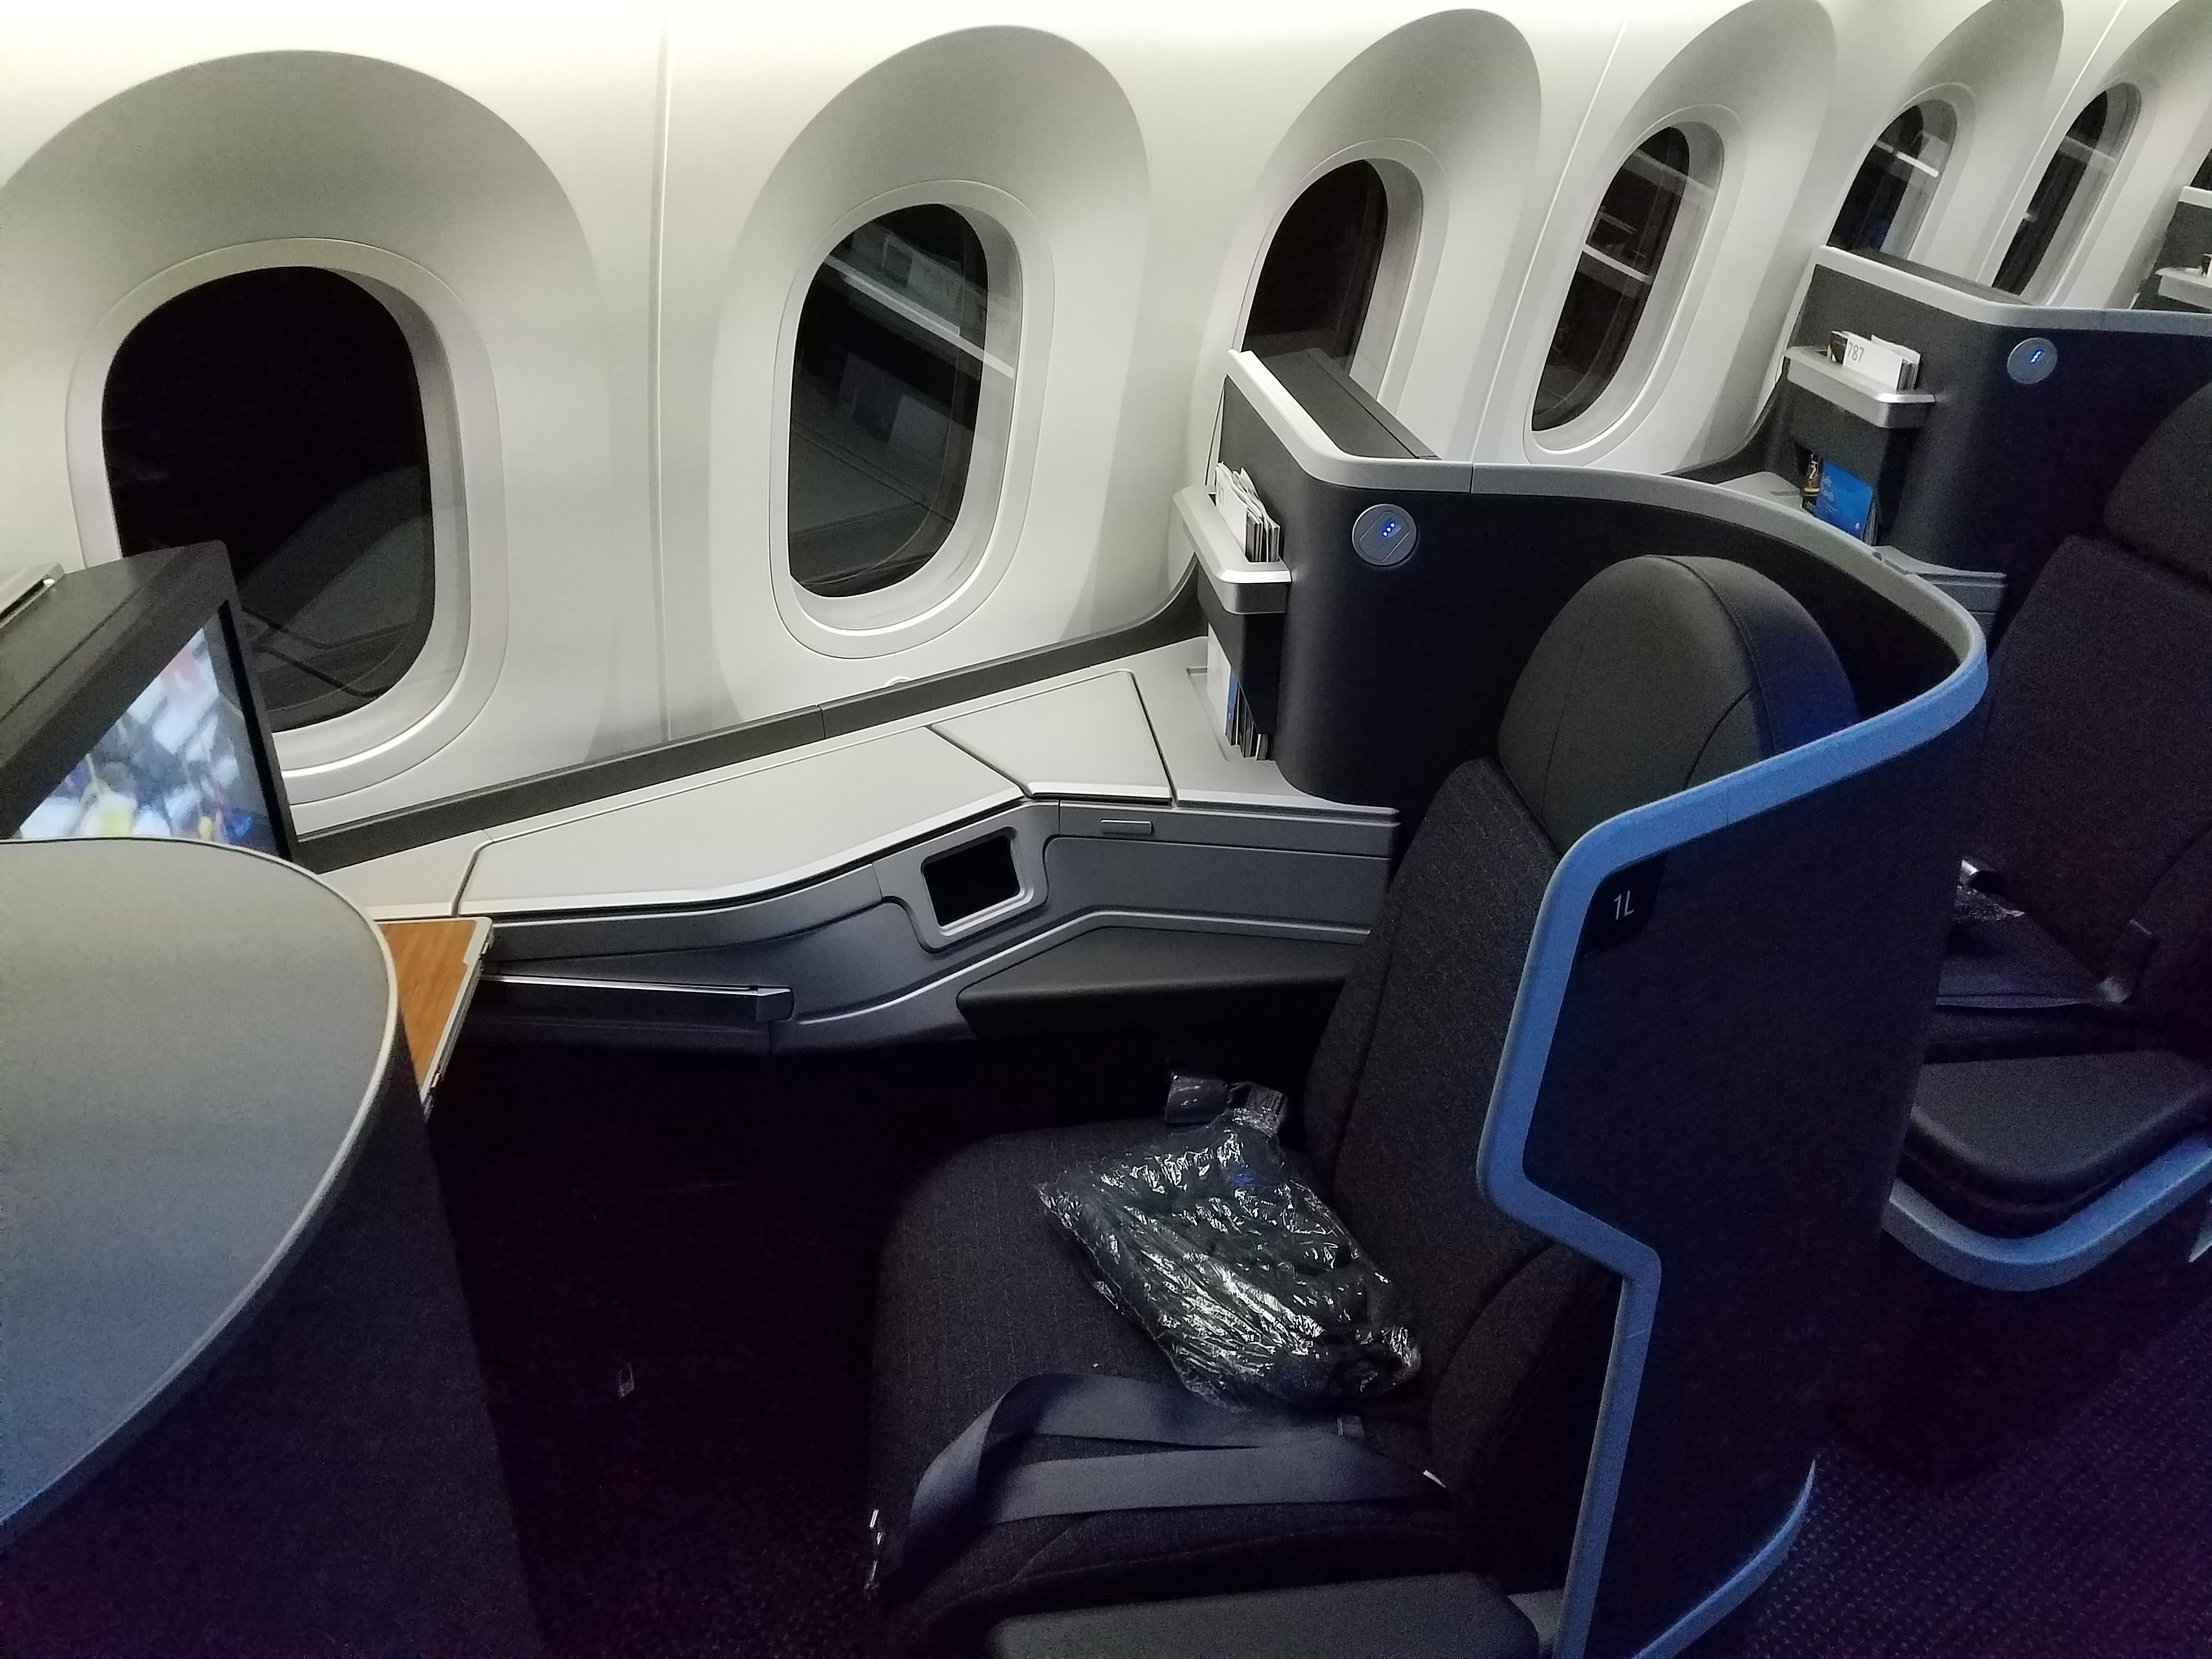 american airlines business class boeing 787-9